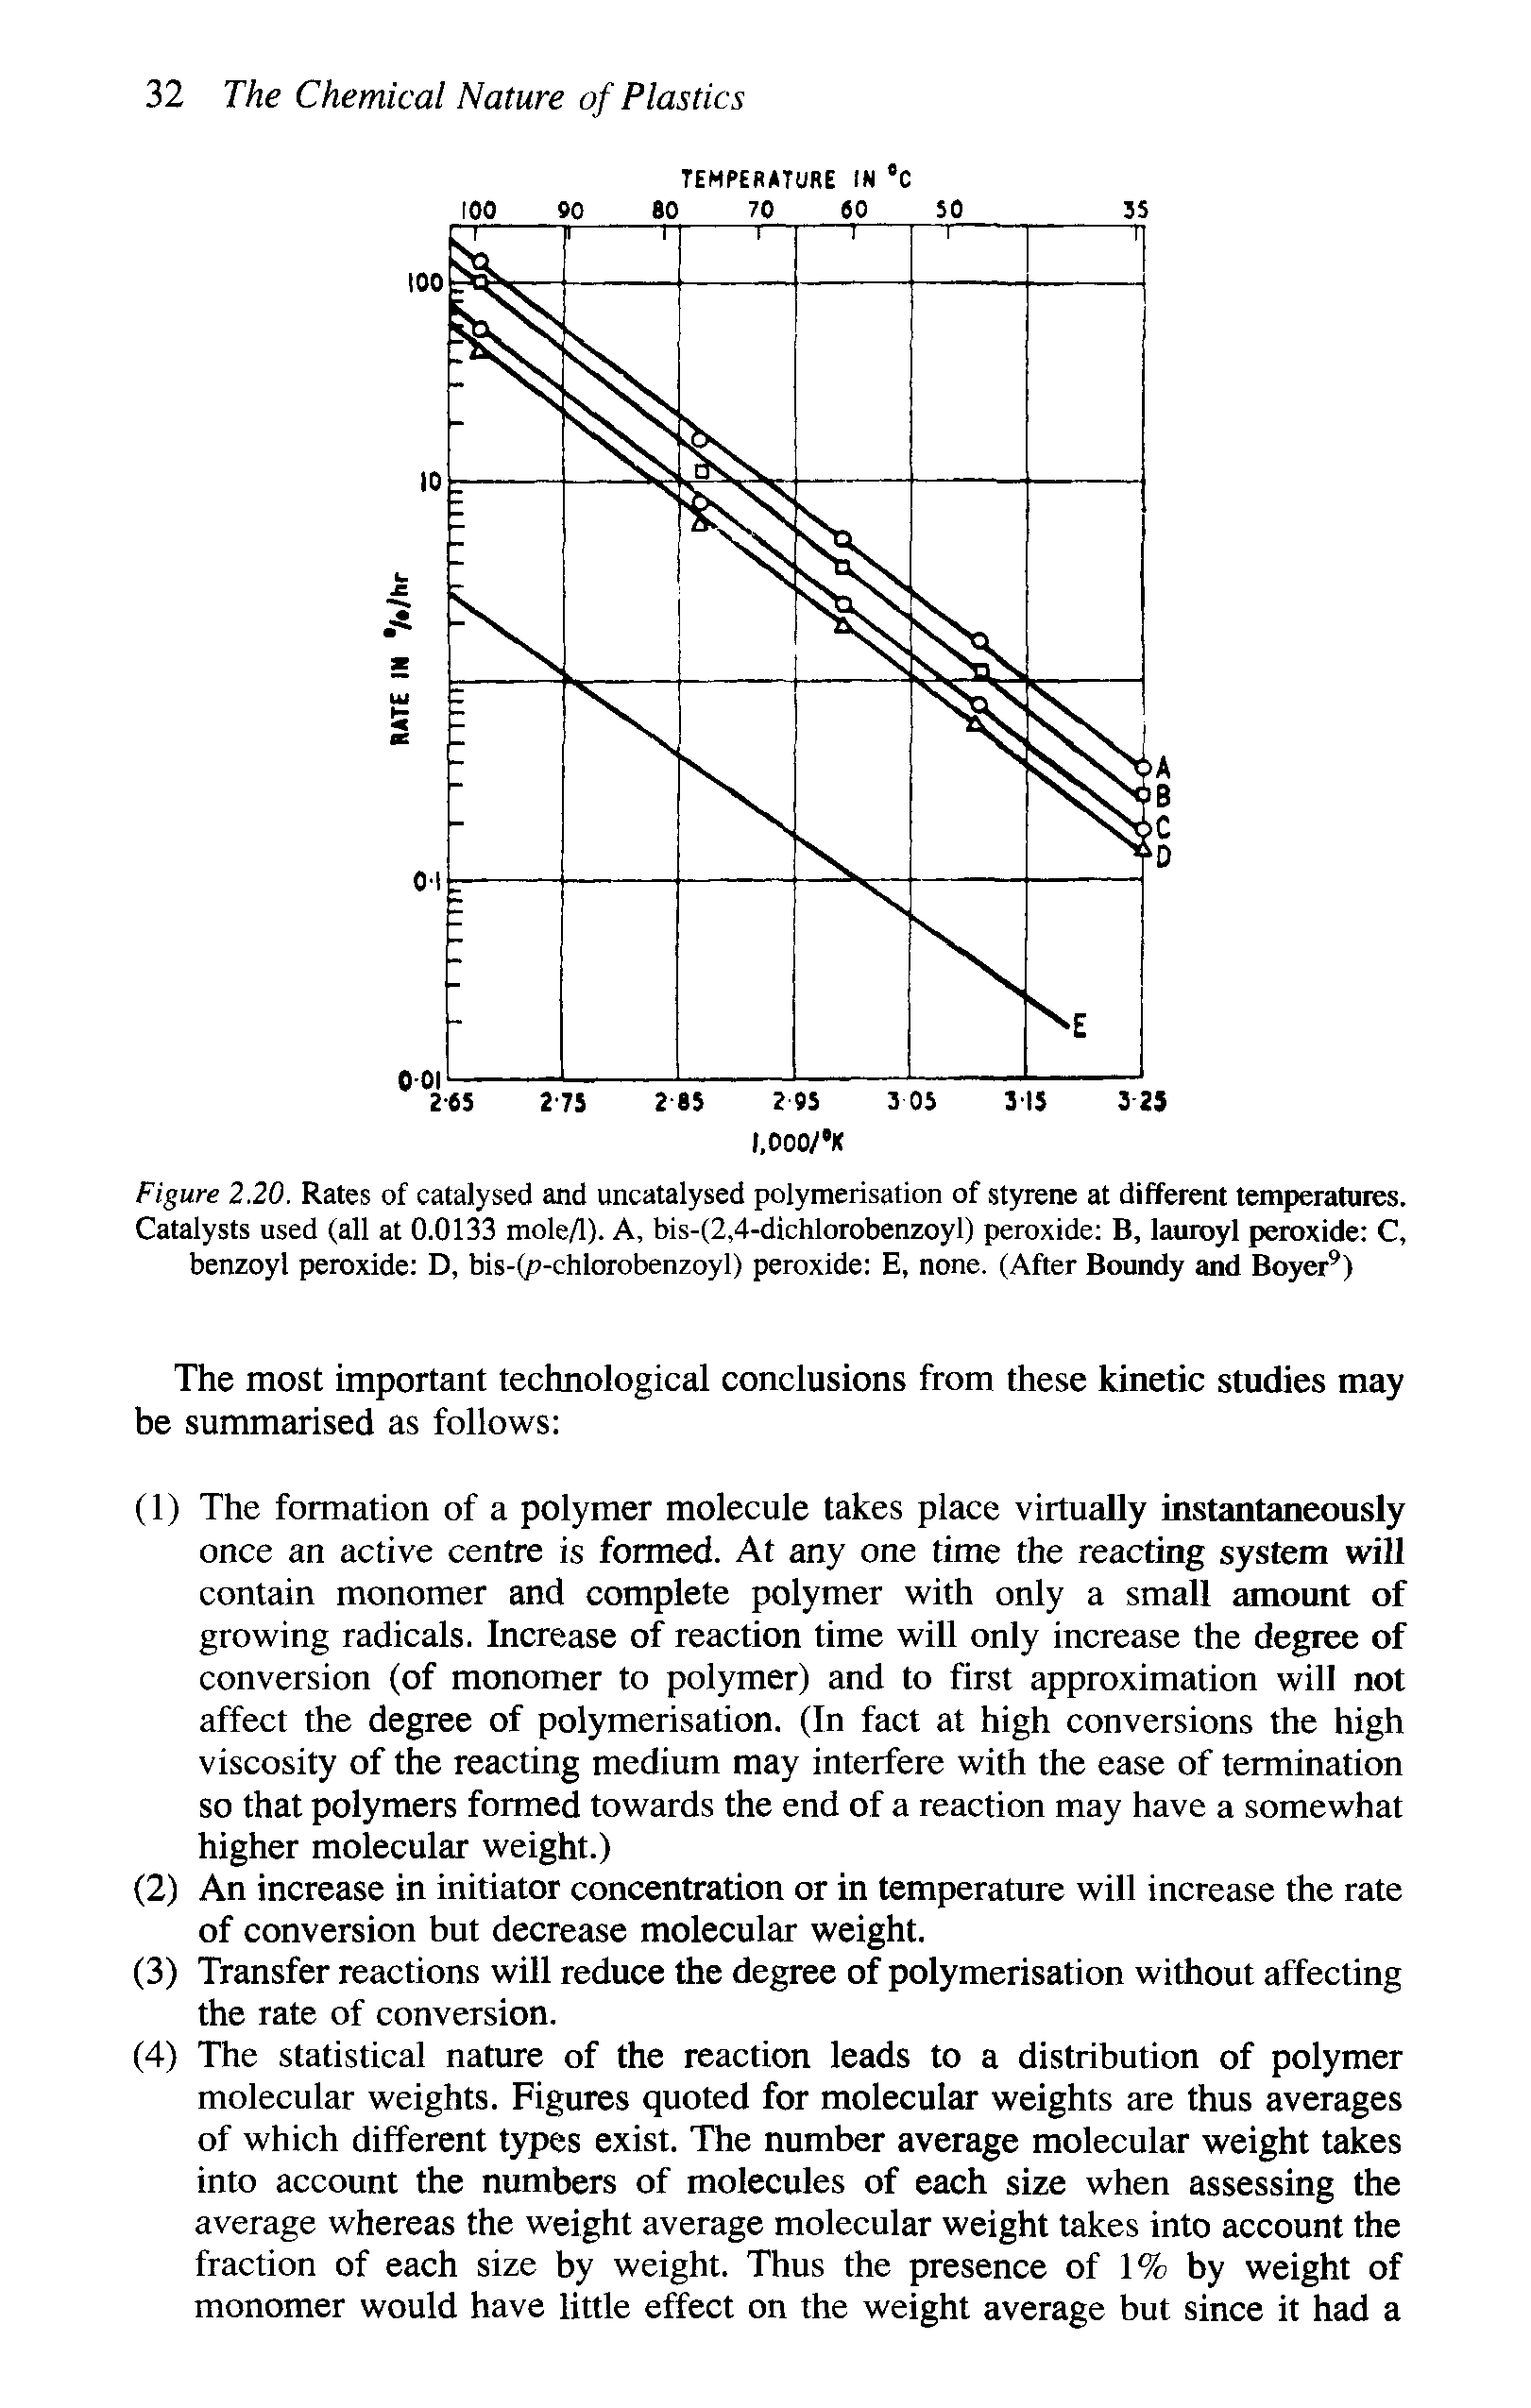 Figure 2.20. Rates of catalysed and uncatalysed polymerisation of styrene at different temperatures. Catalysts used (all at 0.0133 moleA). A, bis-(2,4-dichlorobenzoyl) peroxide B, lauroyl peroxide C, benzoyl peroxide D, bis-(p-chlorobenzoyl) peroxide E, none. (After Boundy and Boyer )...